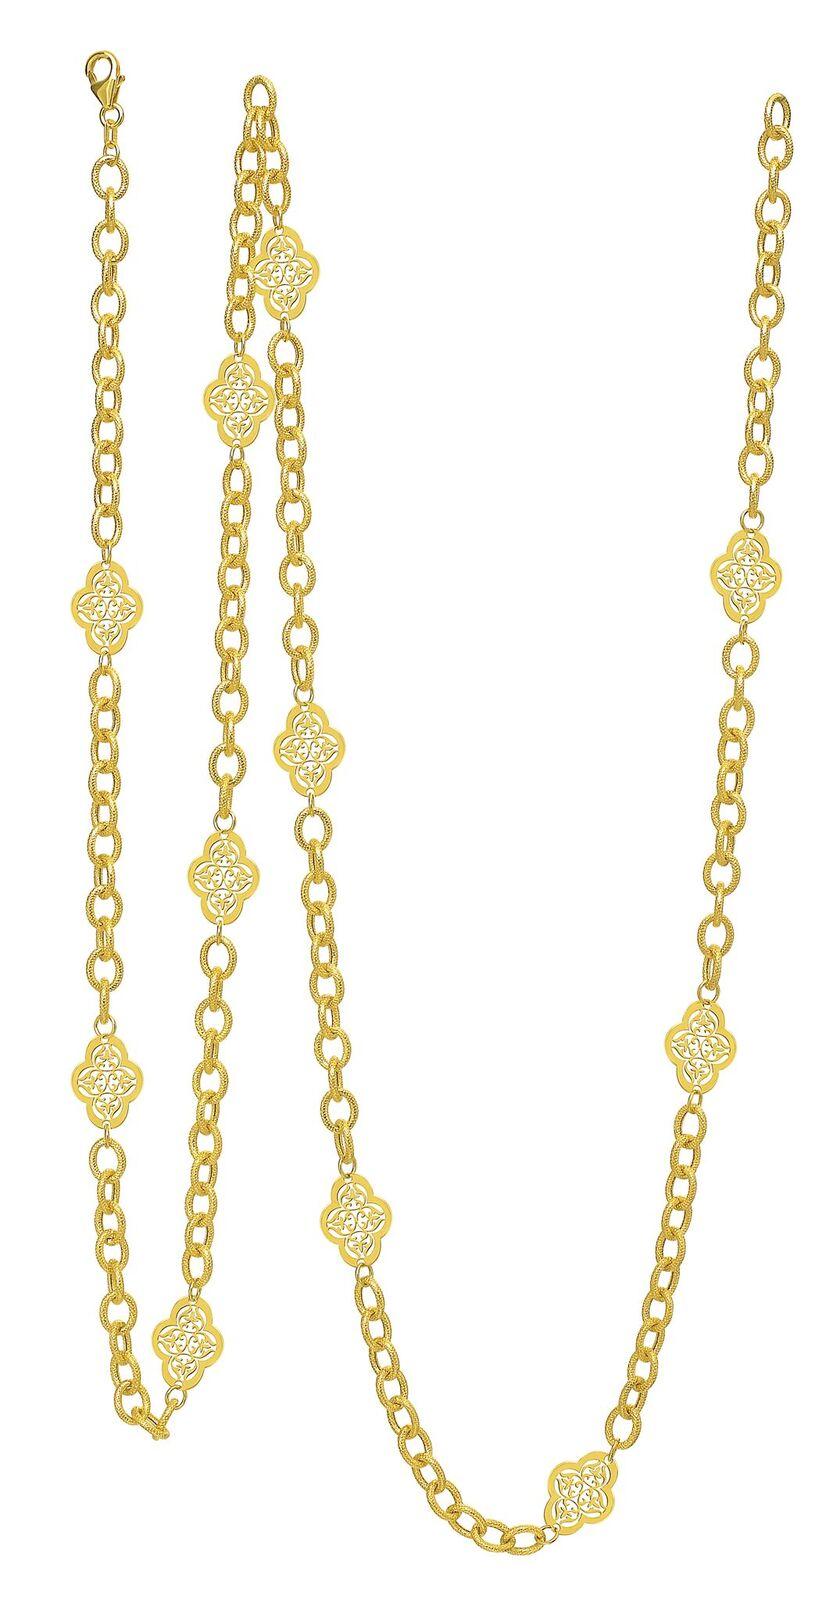 This 14K Italian yellow gold high polish necklace is great for layering and a staple fashion statement. The textured cable necklace with the 11 polished filigree stations gives this piece a vintage look with the classic touch of Italian